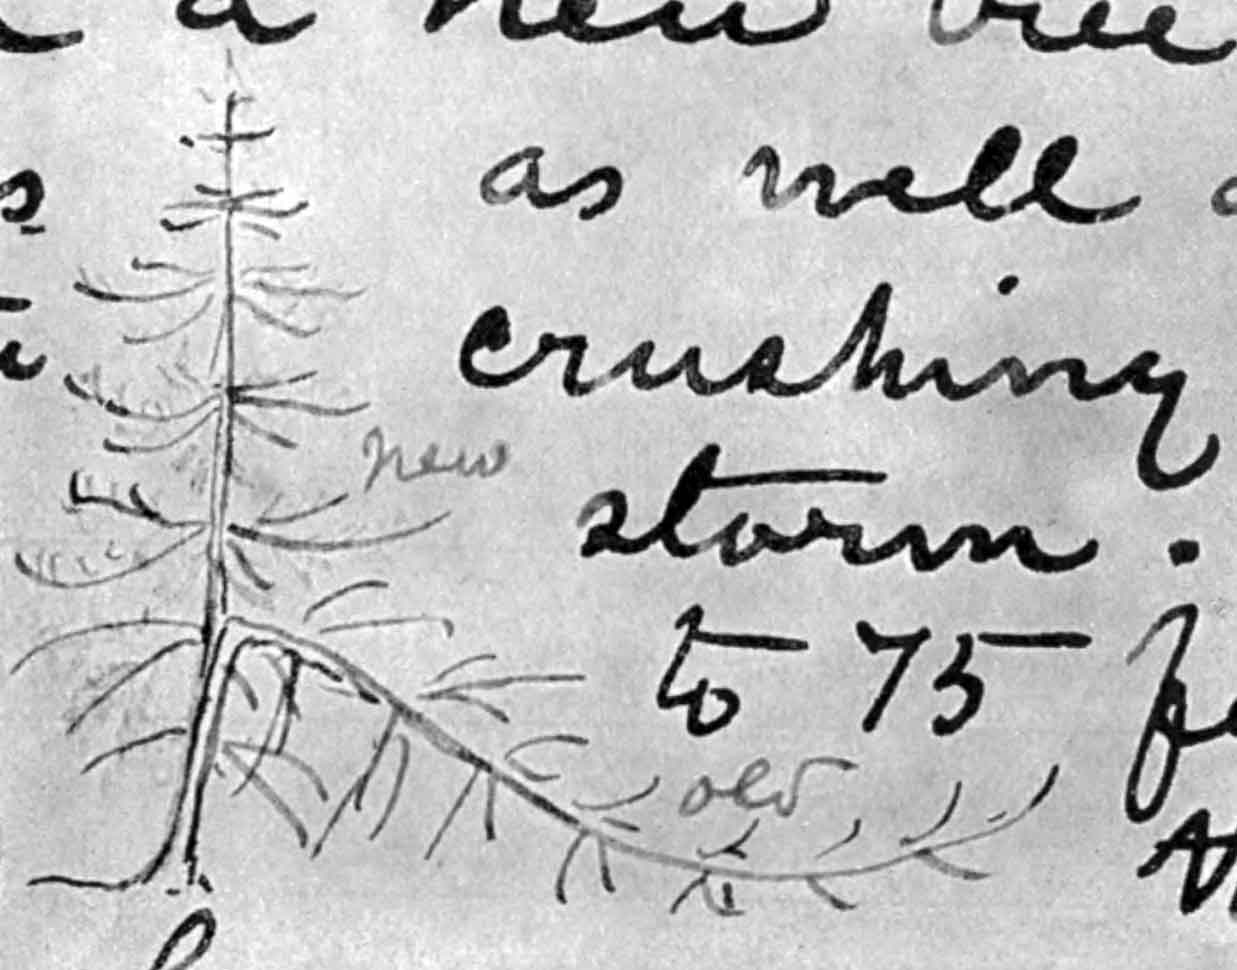 A sketch of a pine tree drawn in the margins of a handwritten journal. The sketch shows a vertical branch extending up from the main trunk. The main trunk is bent over as if it had been burried in heavy snowpack for some time.